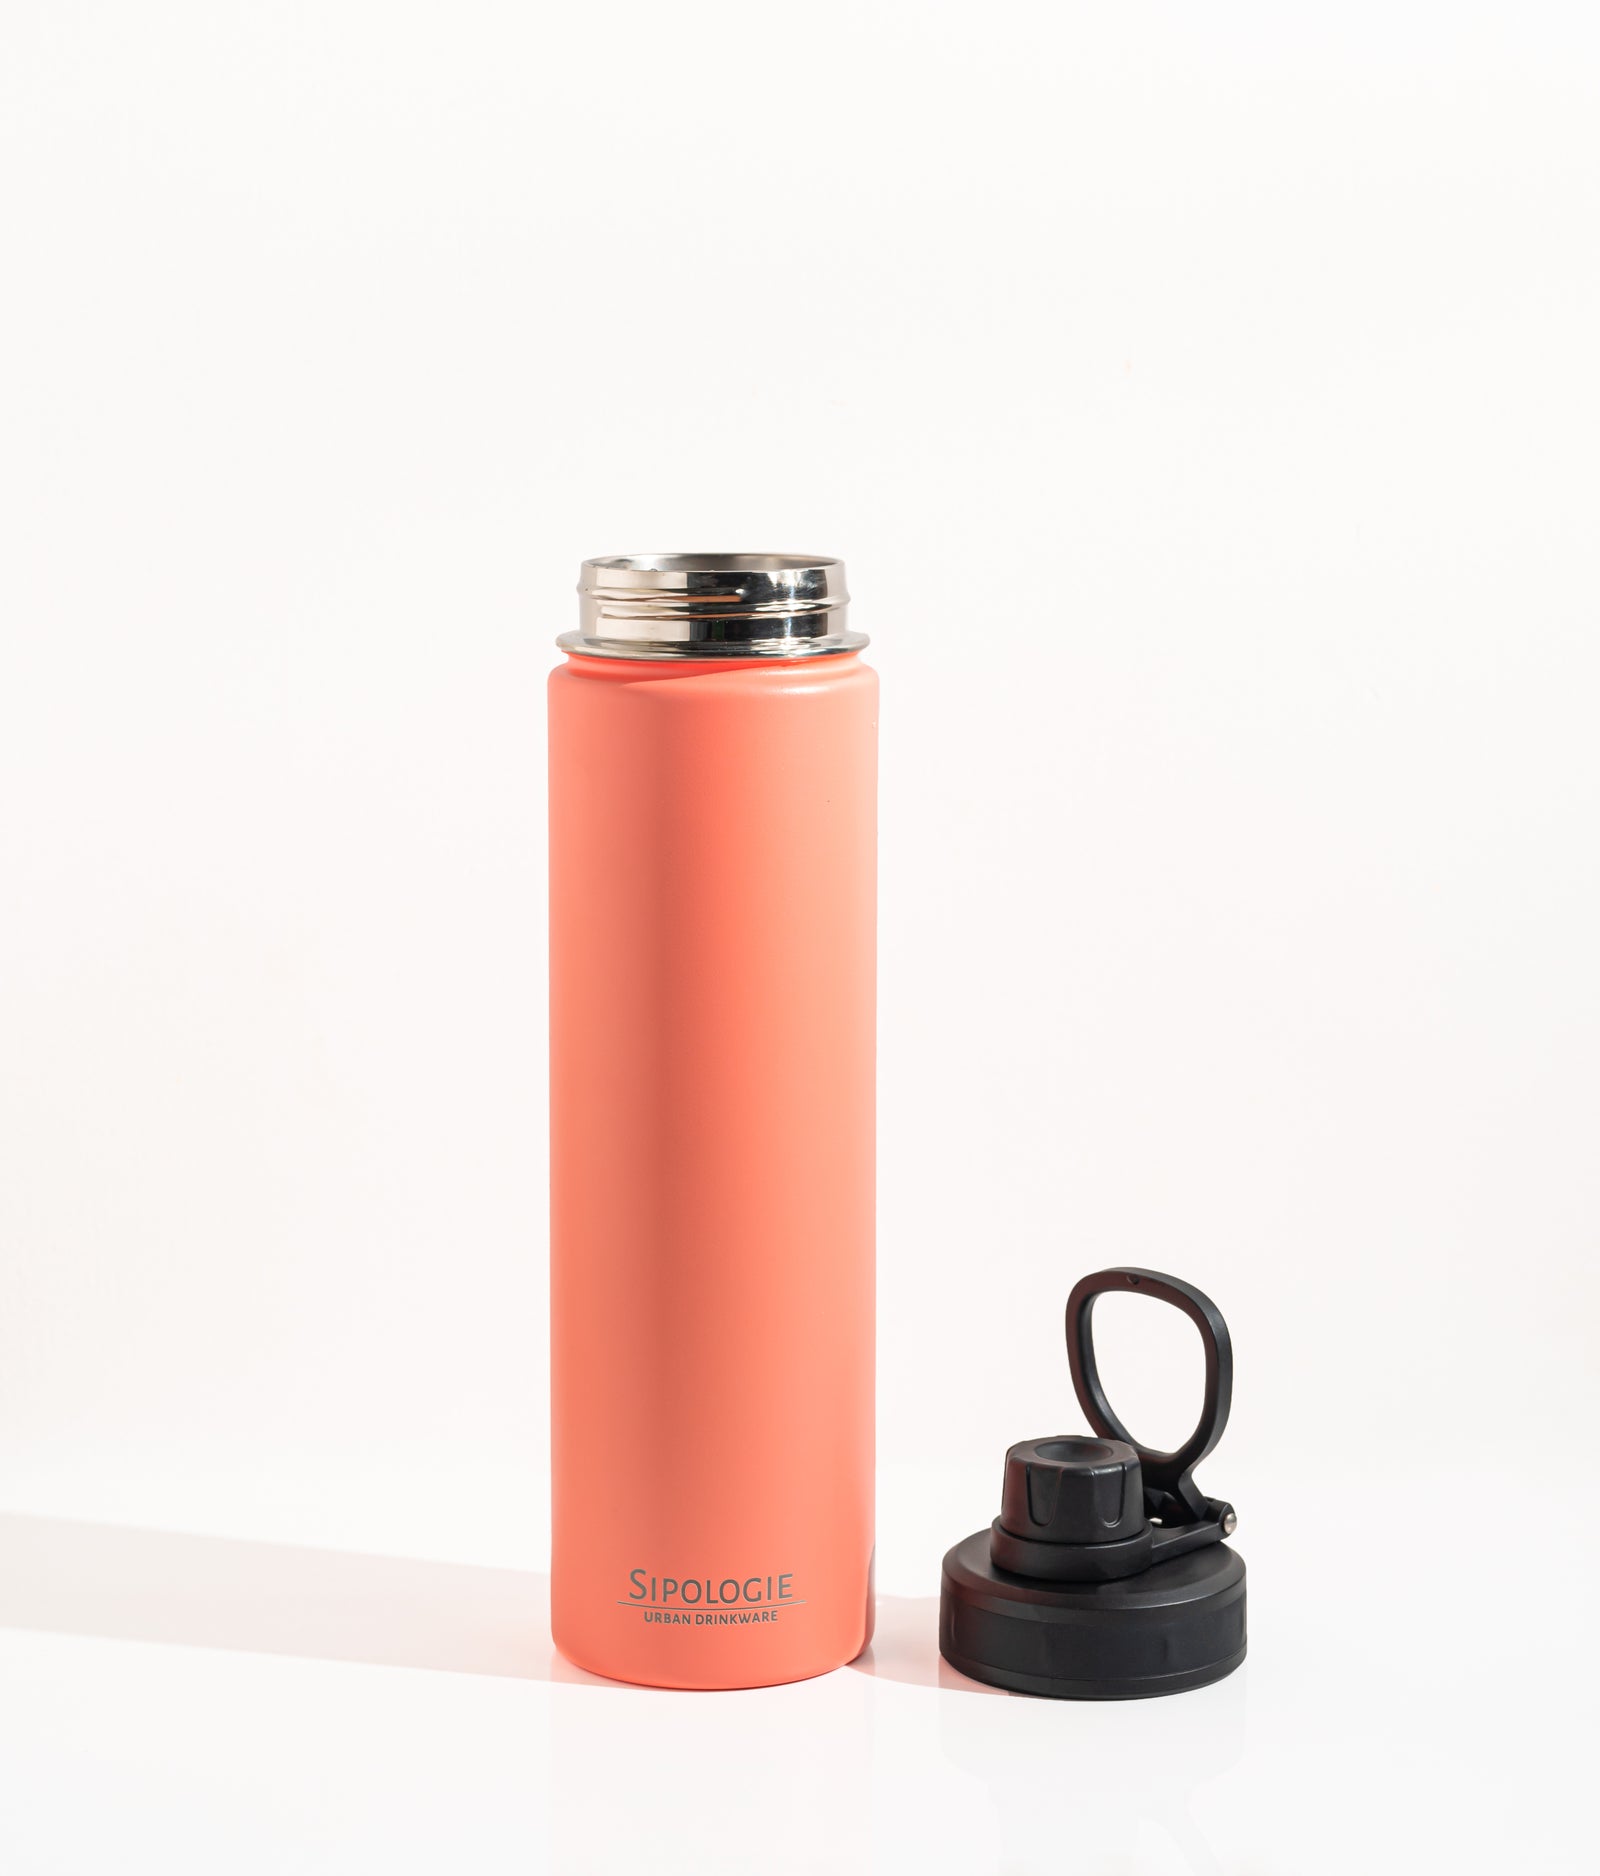 HydraFlow Insulated Bottle, Coral - 720ml